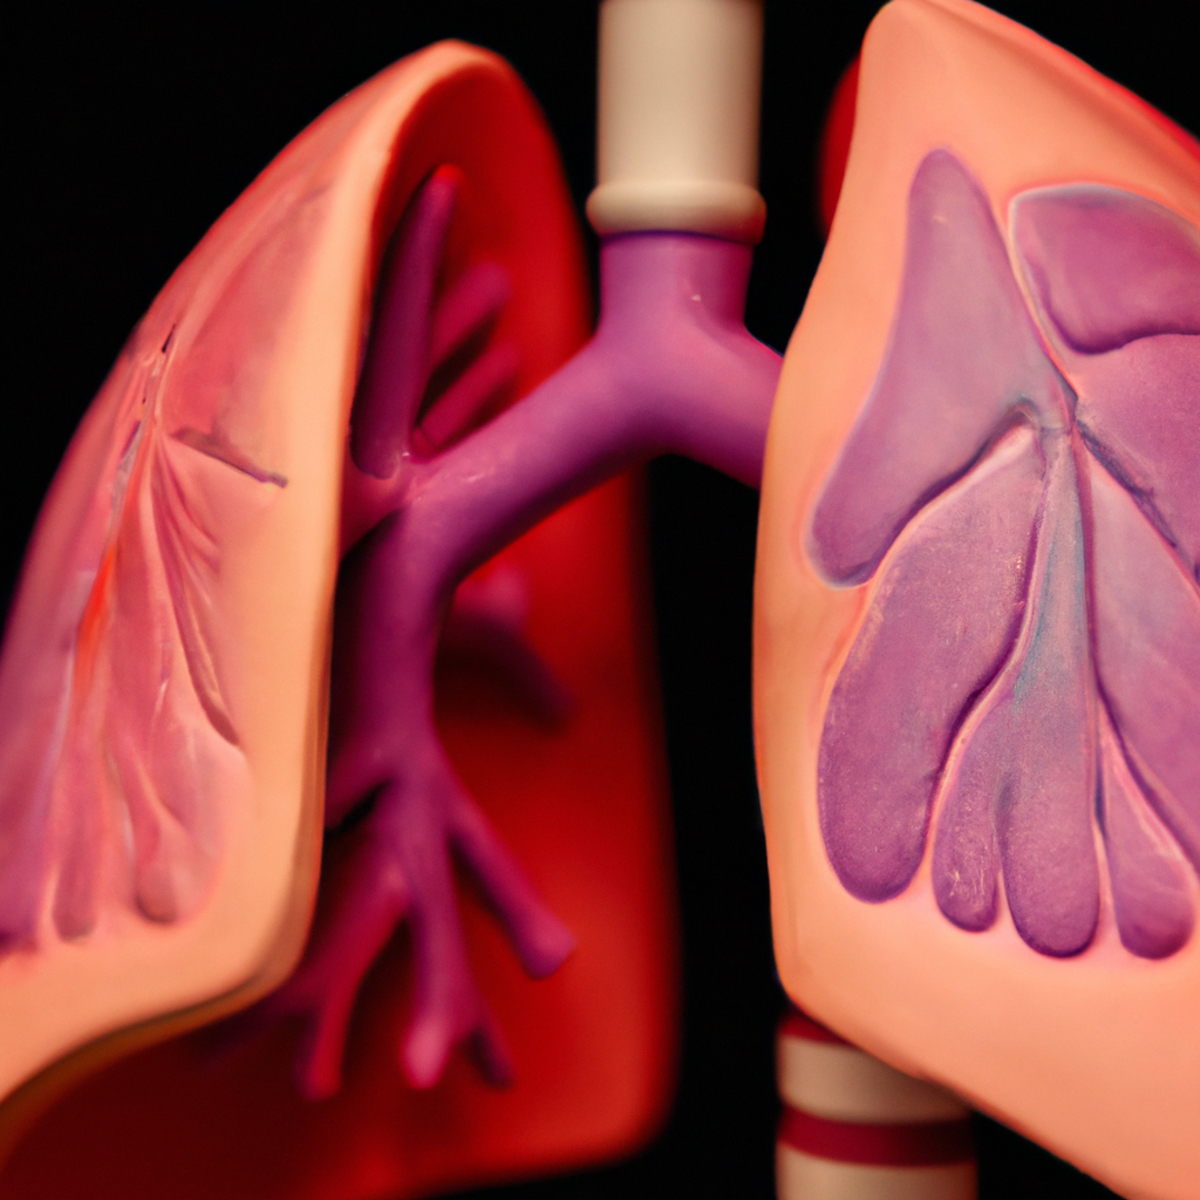 3D model of human lungs with Pleuropulmonary Blastoma area highlighted.